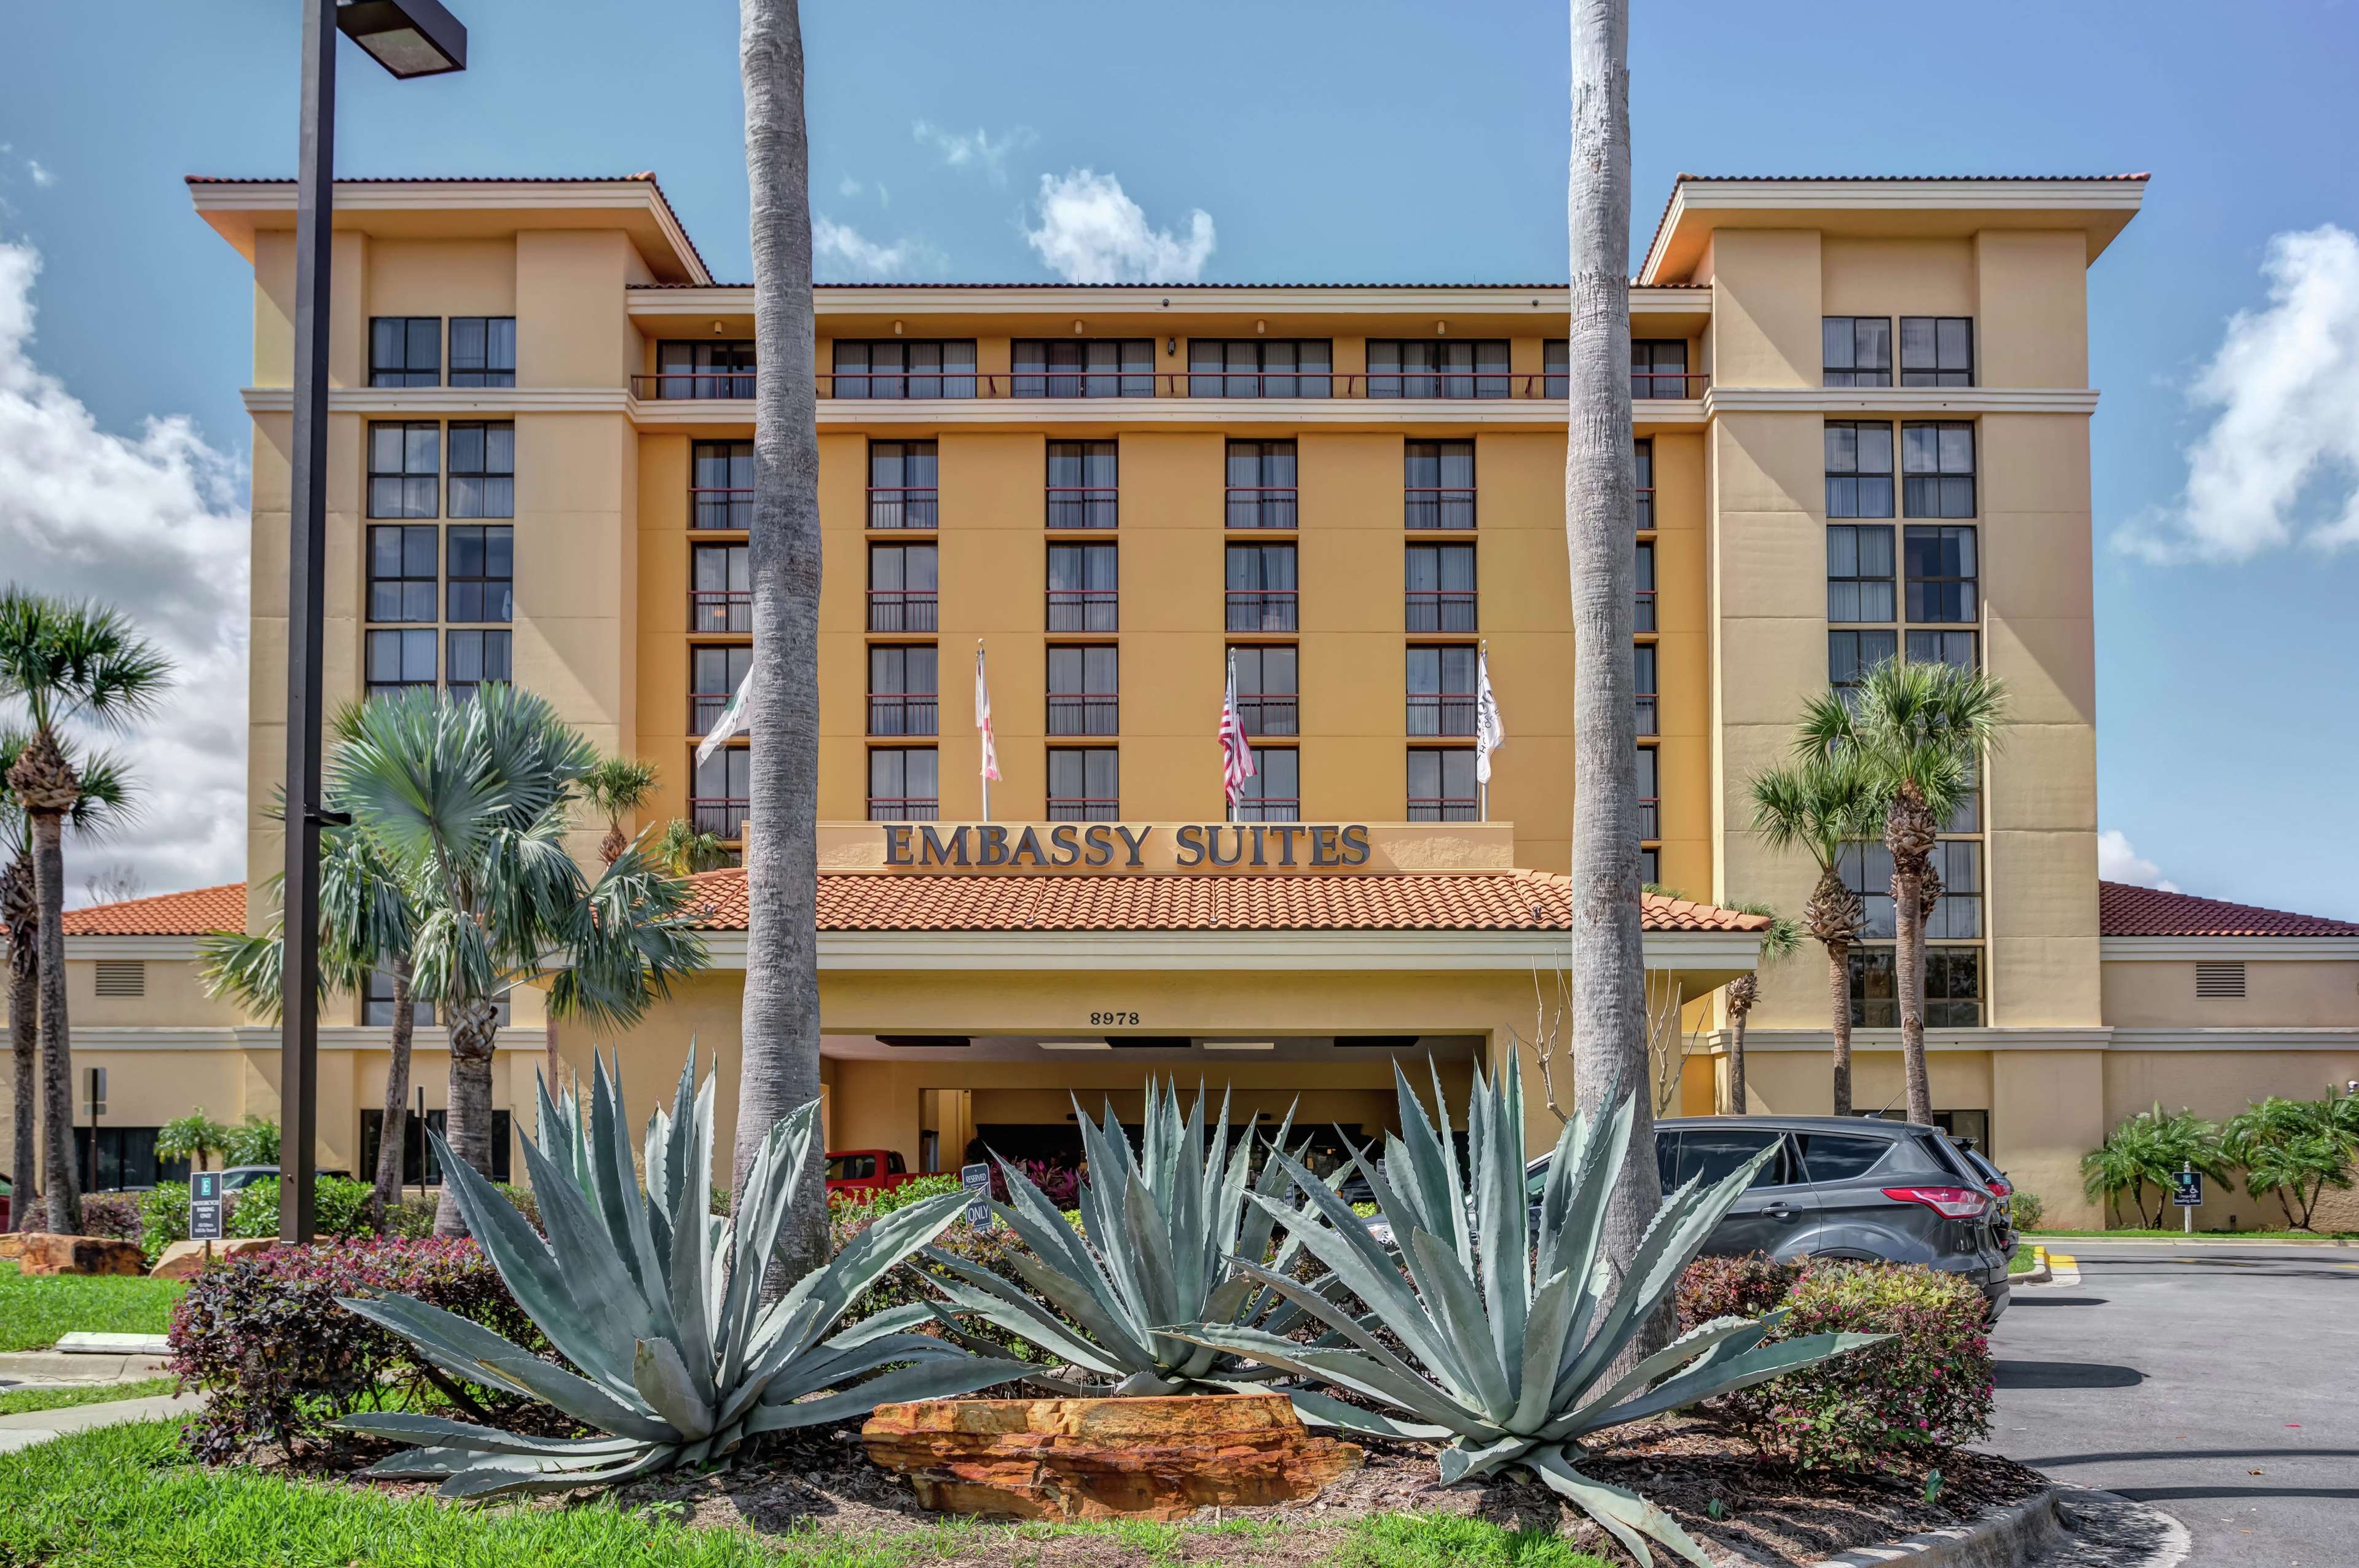 Embassy Suites by Hilton Orlando International Drive Convention Center Photo